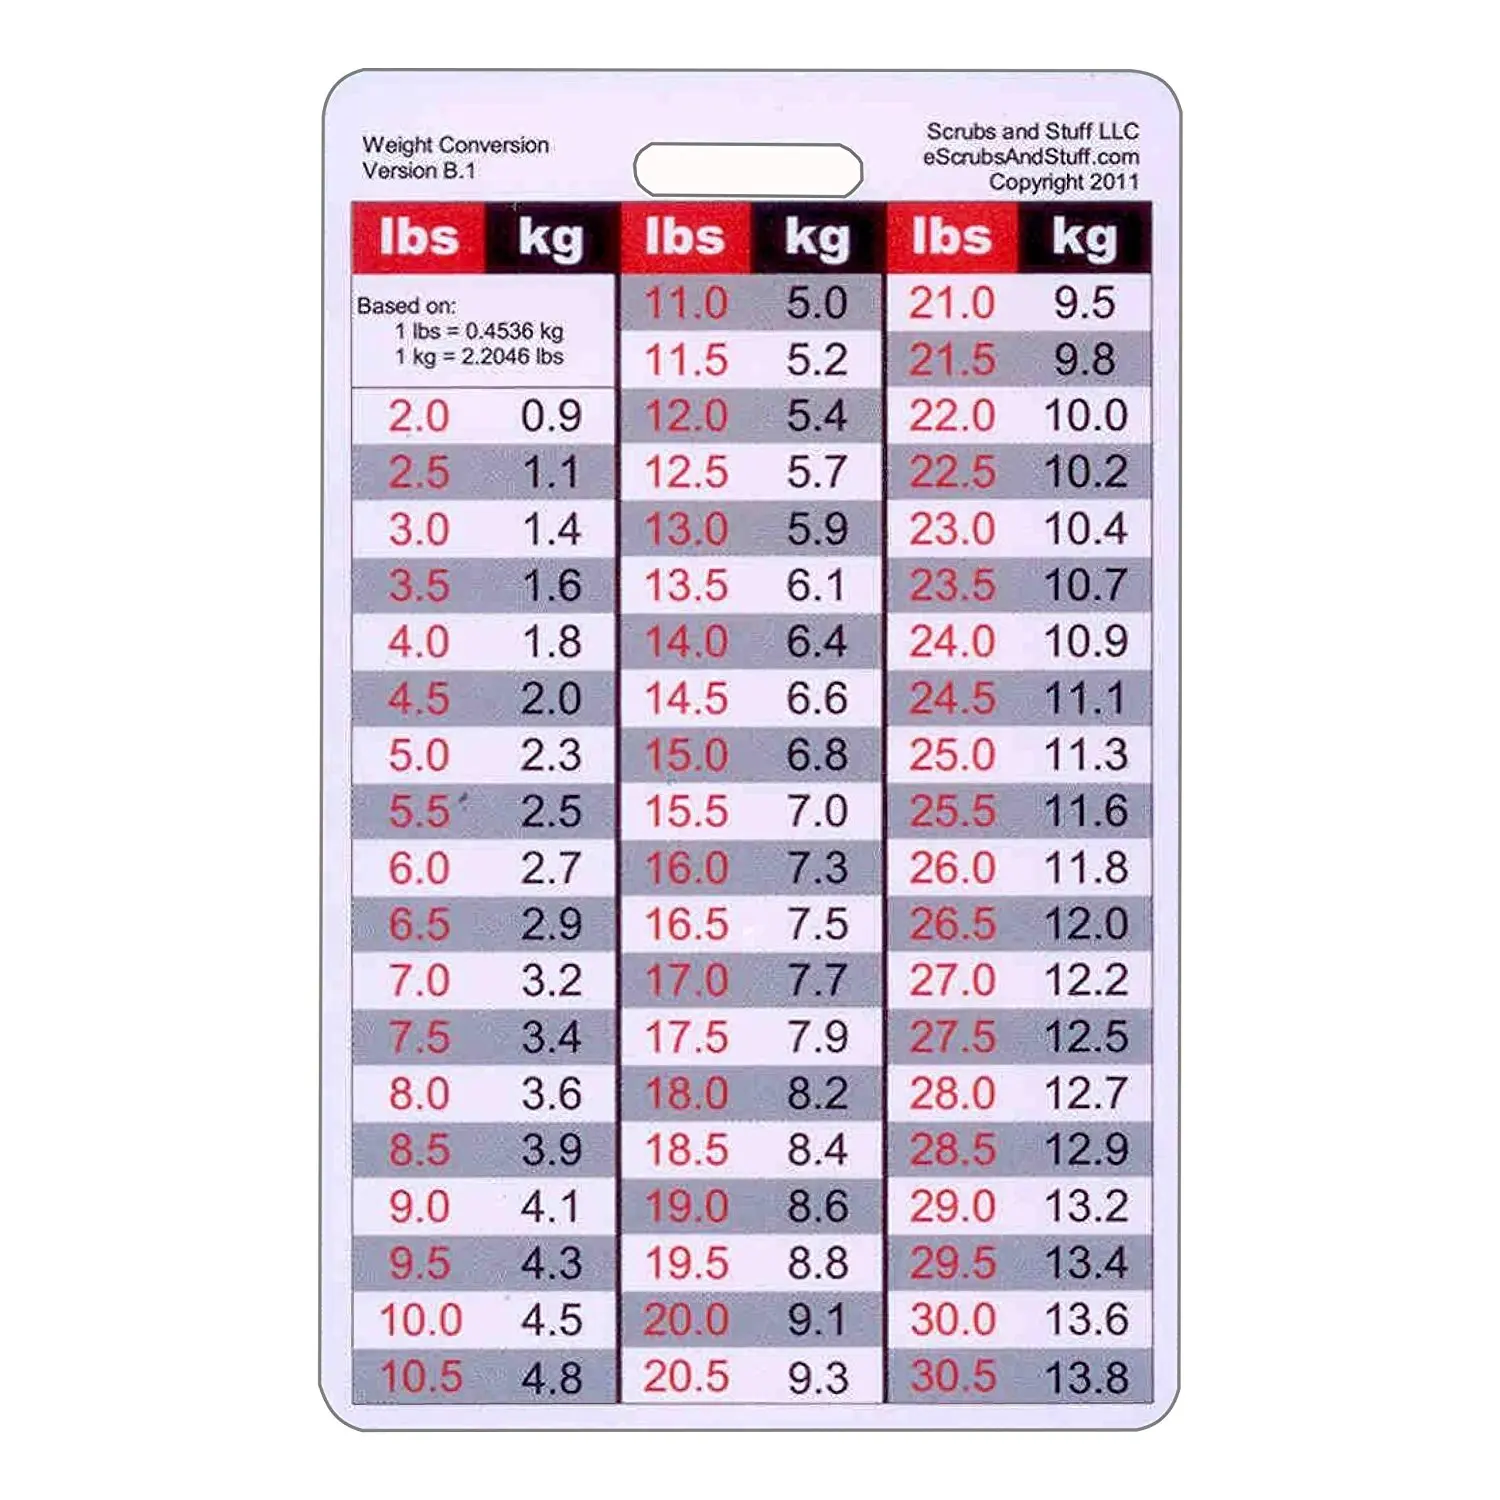 Weight Conversion Chart Lbs To Kgs Pvc Plastic Card Nurse Doctor Paramedic ...